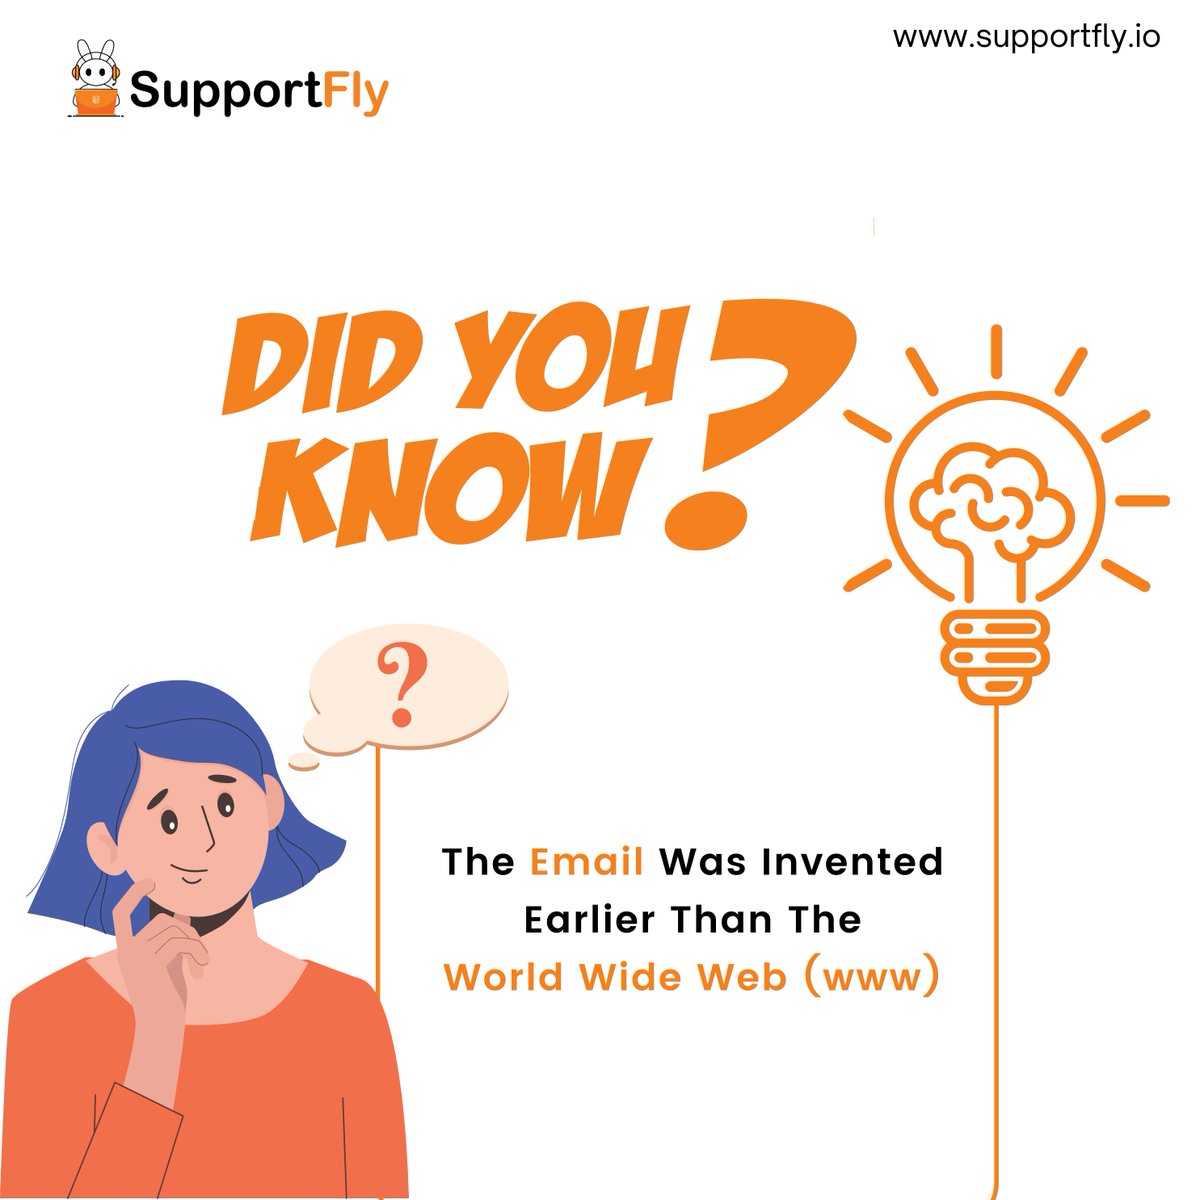 Did you know email was invented before the World Wide Web? Stay ahead with Supportfly, where we manage your servers with the wisdom of the past and technology of the future.
#server #email #emailserver #serversupport #servermanagement #serversolution #serversolutions #supportfly